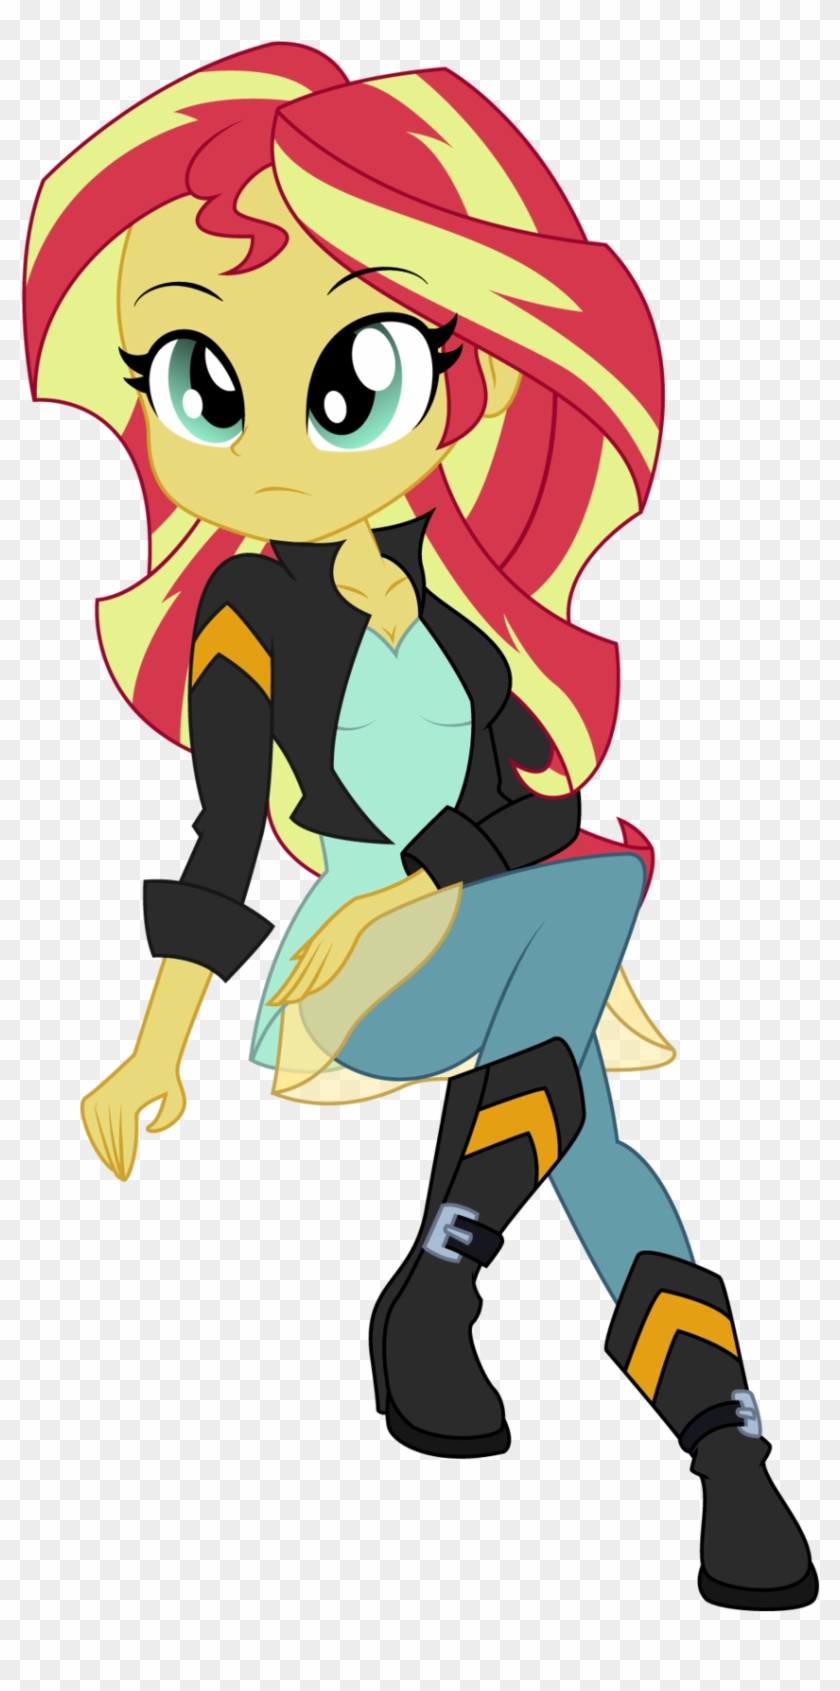 Sunset Shimmer's New Outfit By Discorded-joker - Sunset Shimmer New Outfit #888514